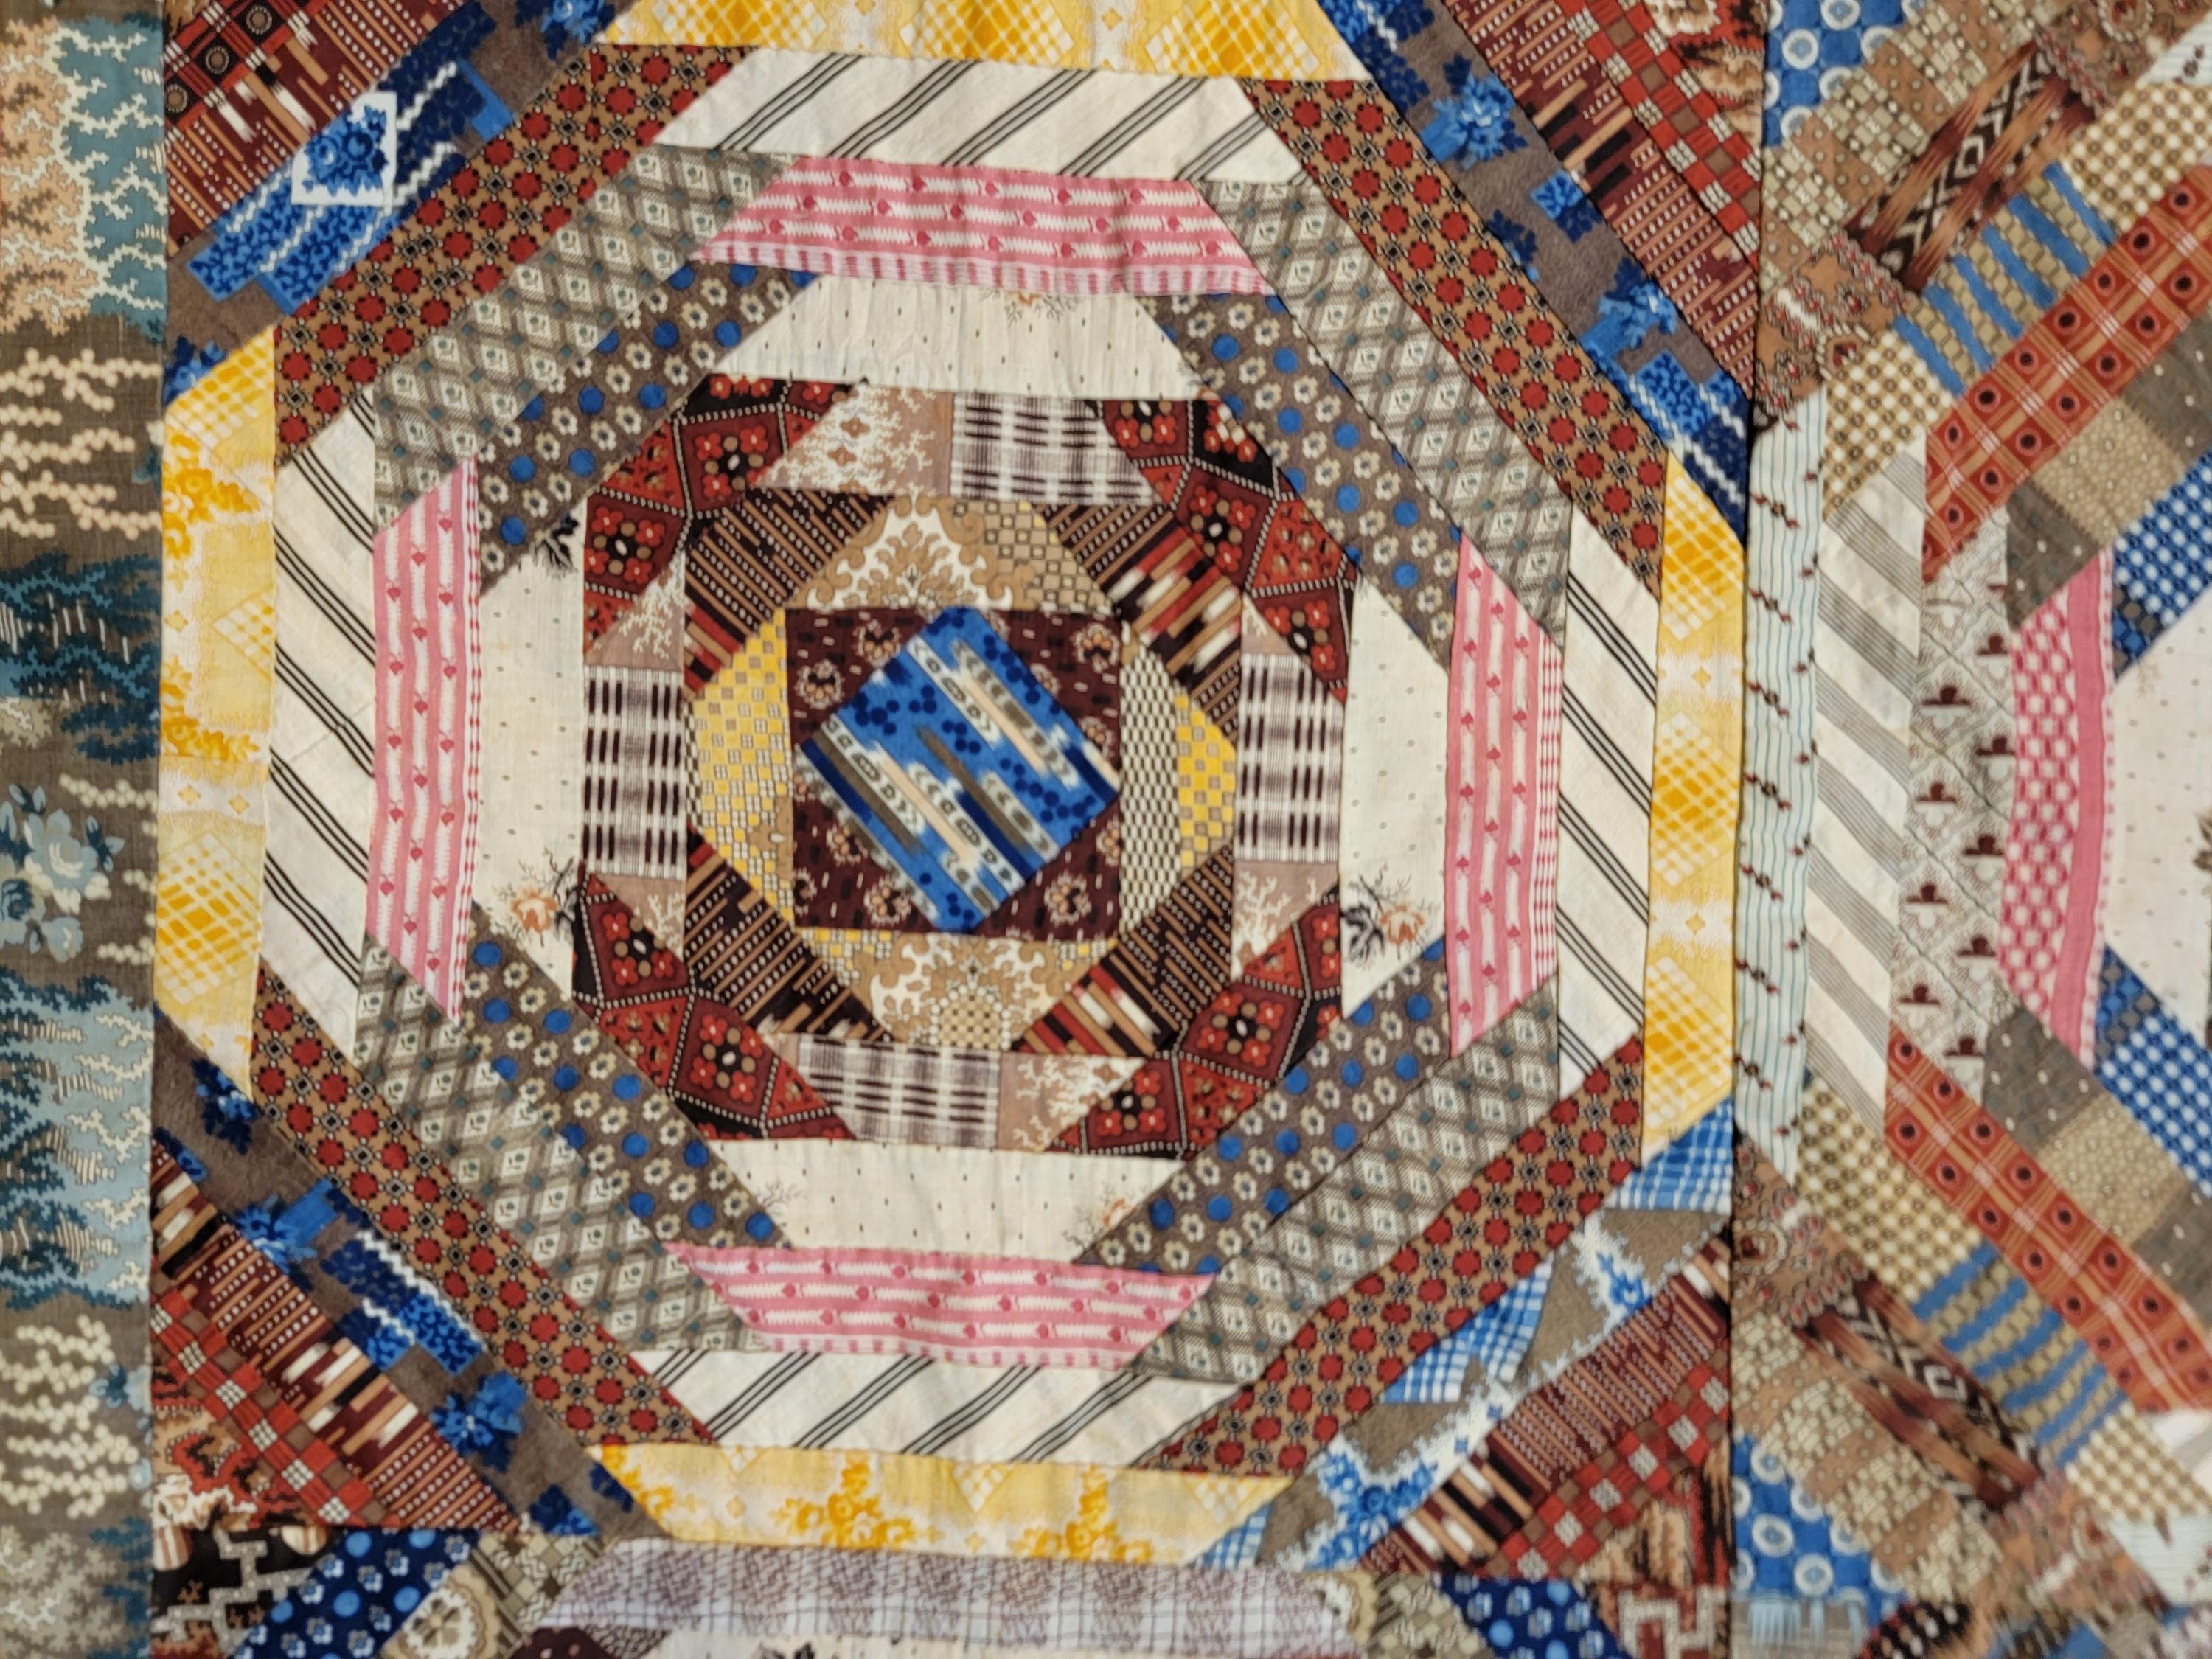 This amazing early 19thc Pine Apple log cabin quilt is in amazing condition. It was gifted in 1883 and signed : To Larrissa From C.A.G. 1883. The quilt contains fabric from 1800-1840 it is so spectacular and in amazing condition.